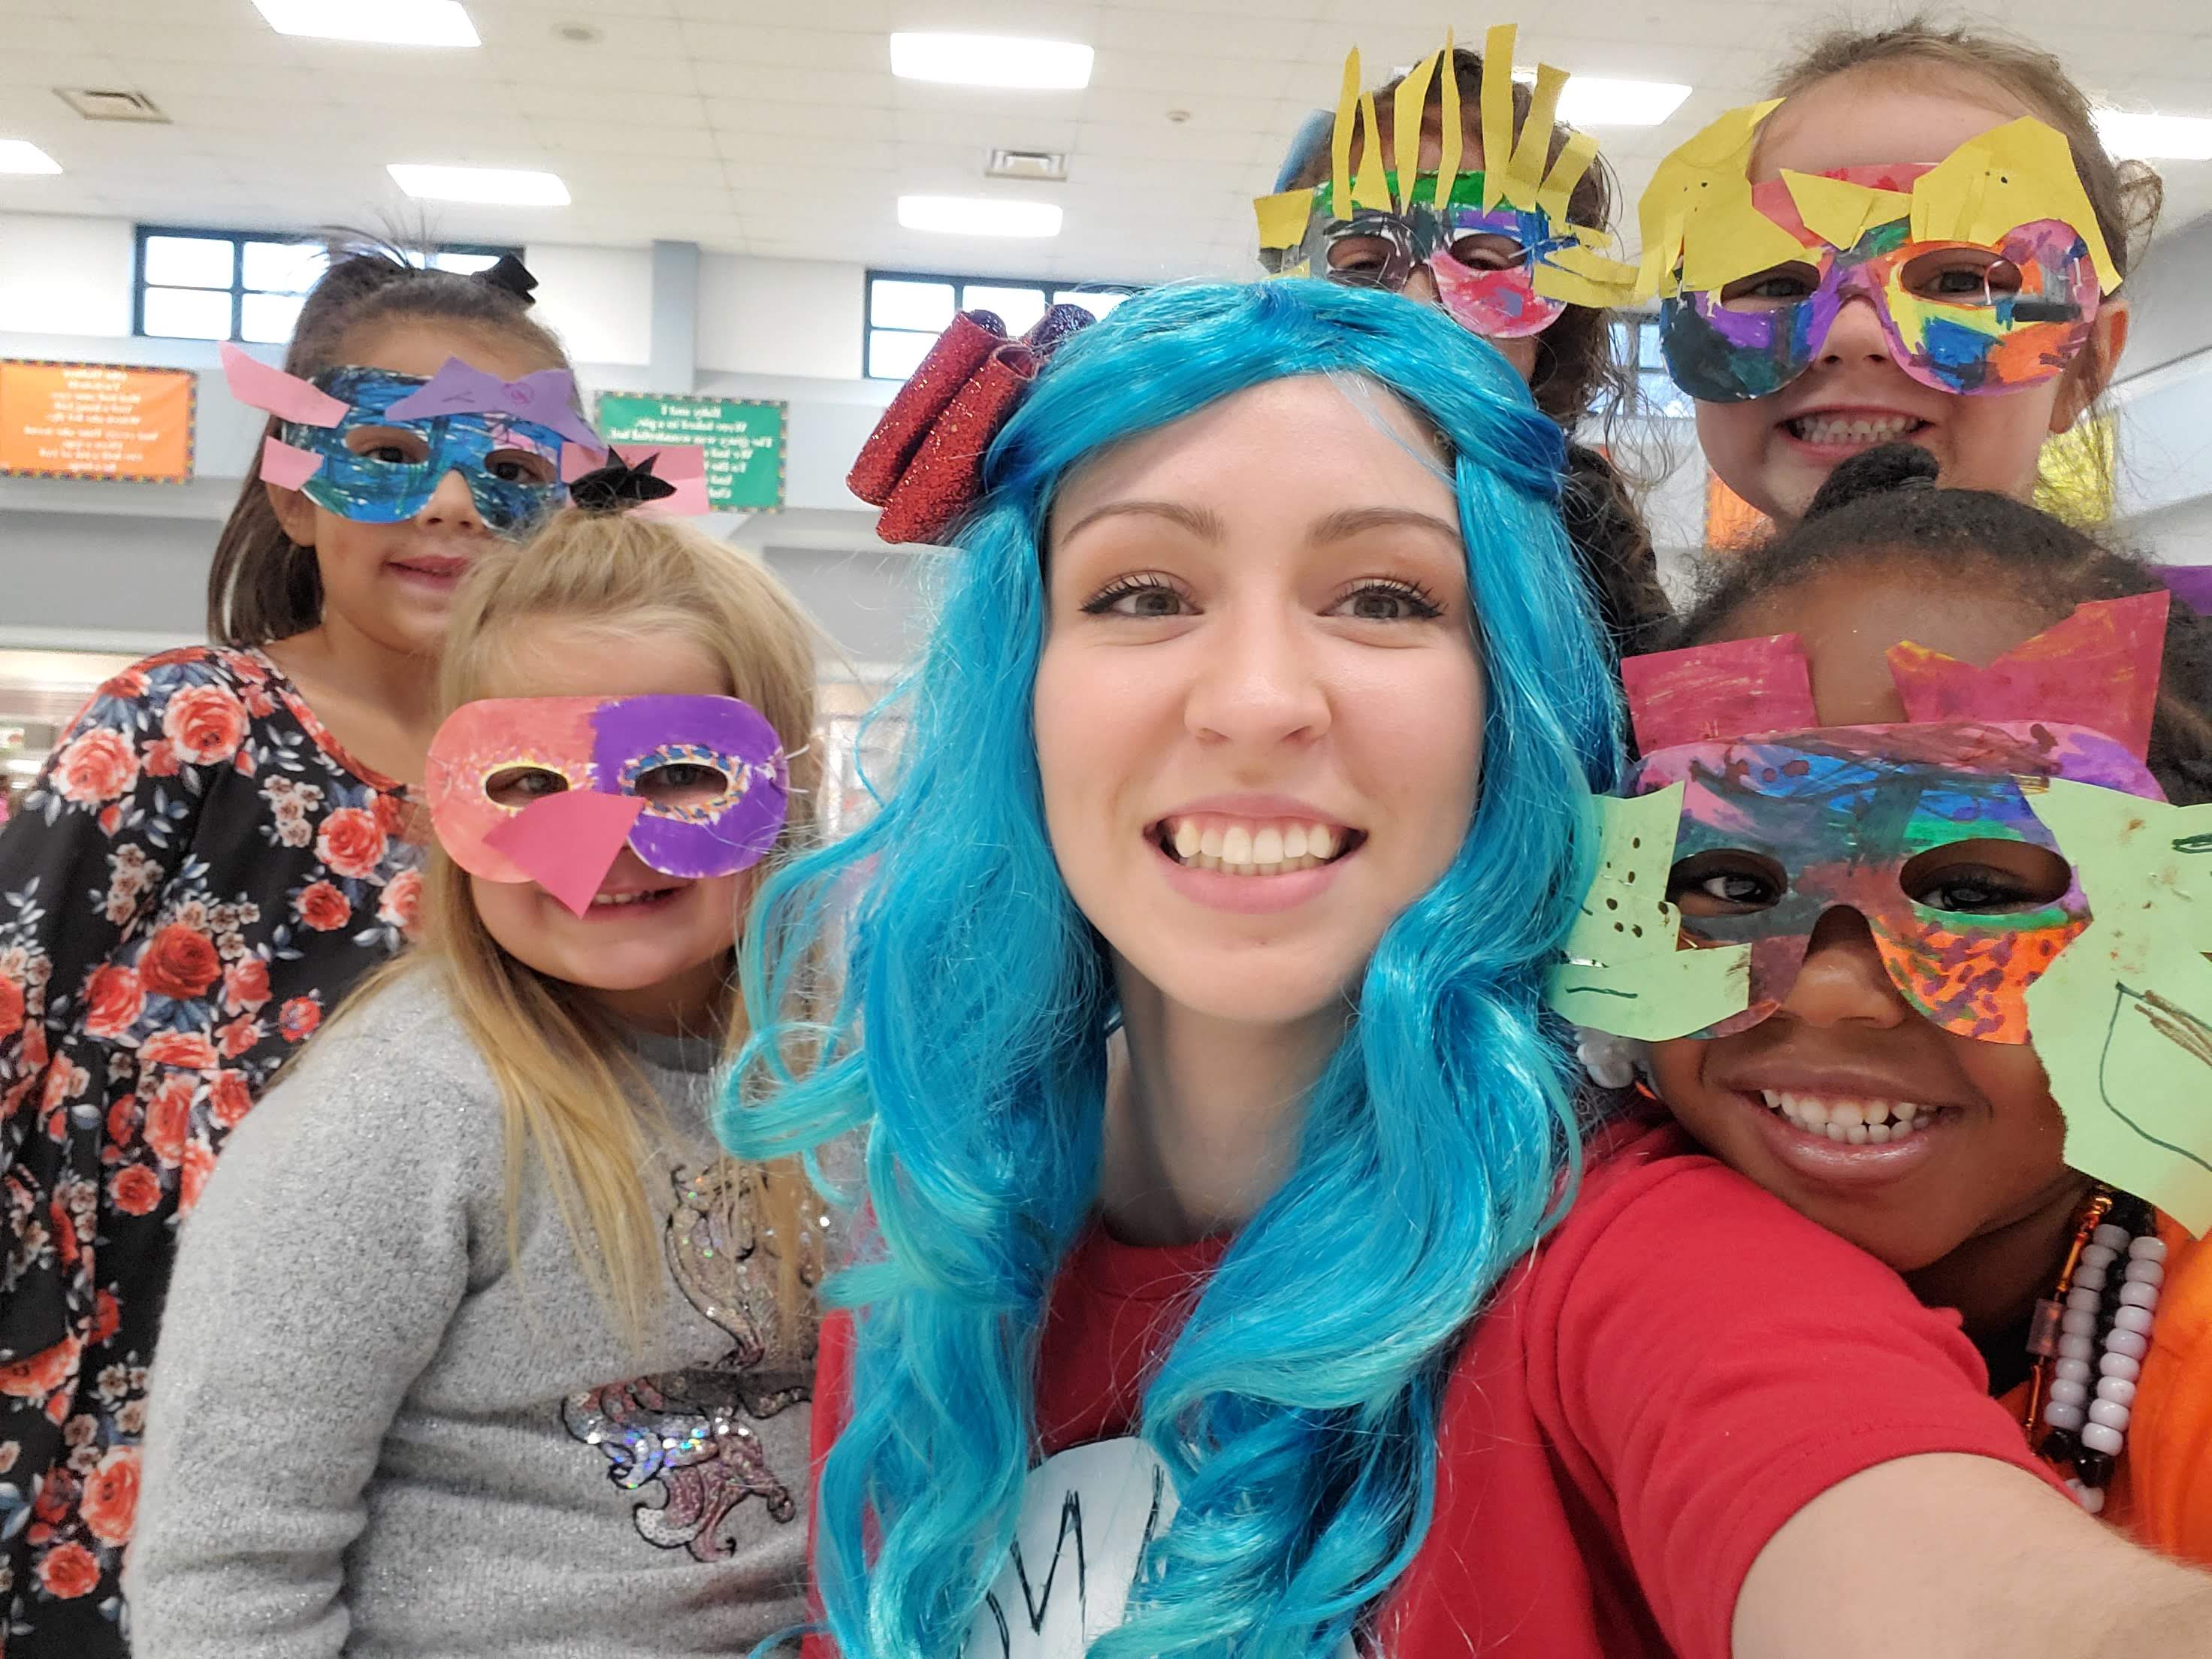 Four students dressed up in masks and a teacher wearing a blue wig